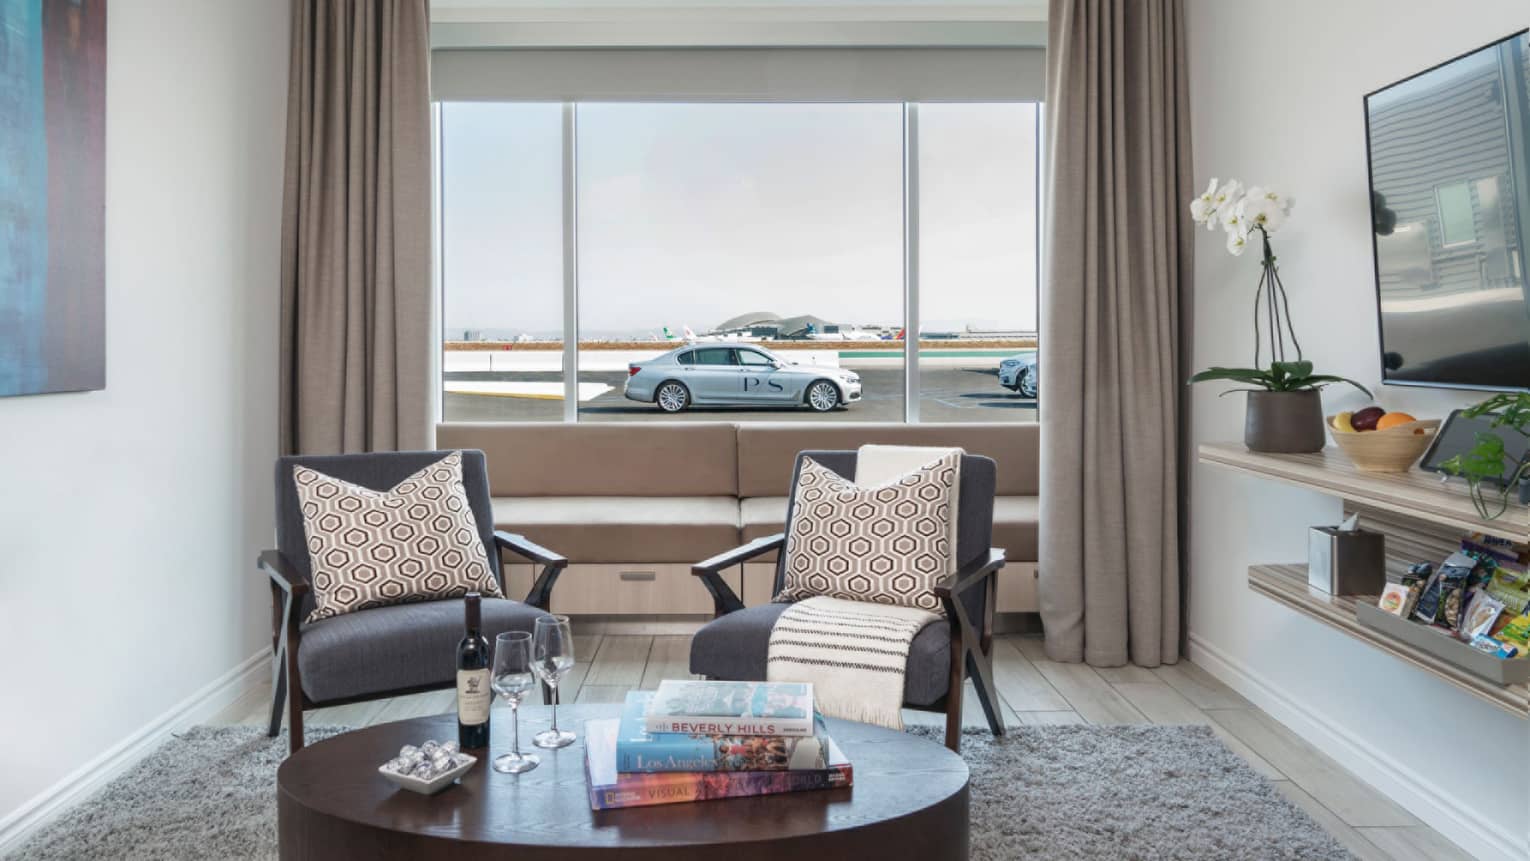 Private airport Suite seating area, car and runway in background through window